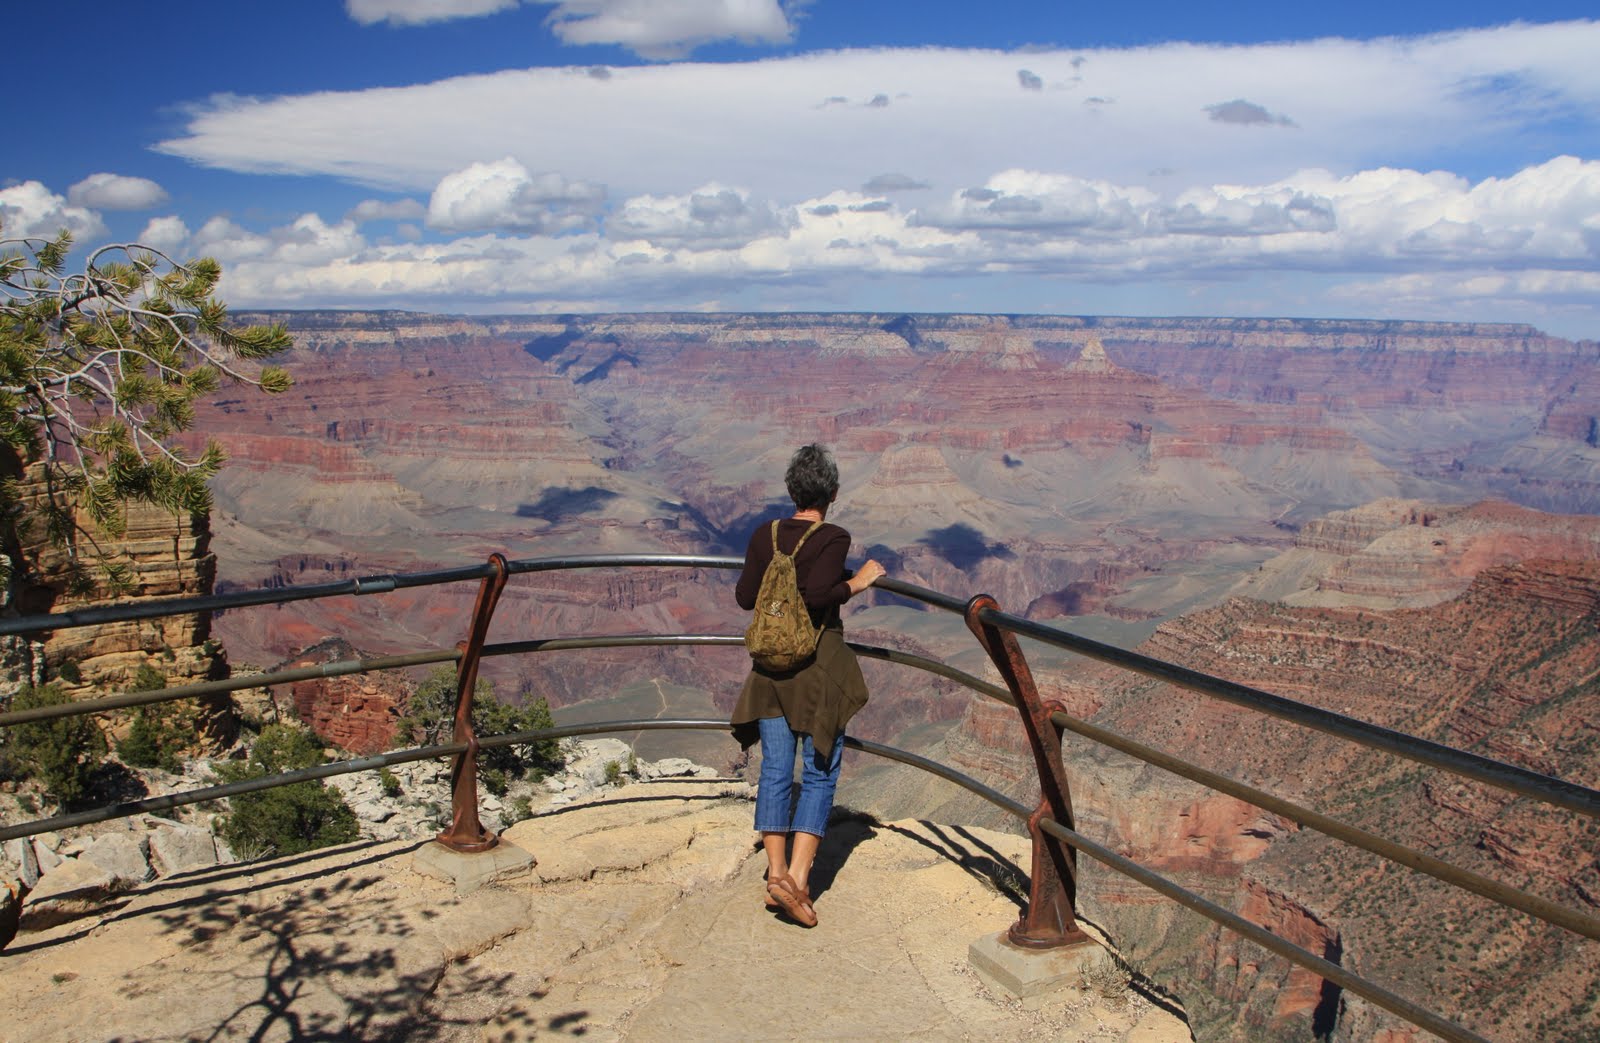 Standing at the railing of the Grand Canyon